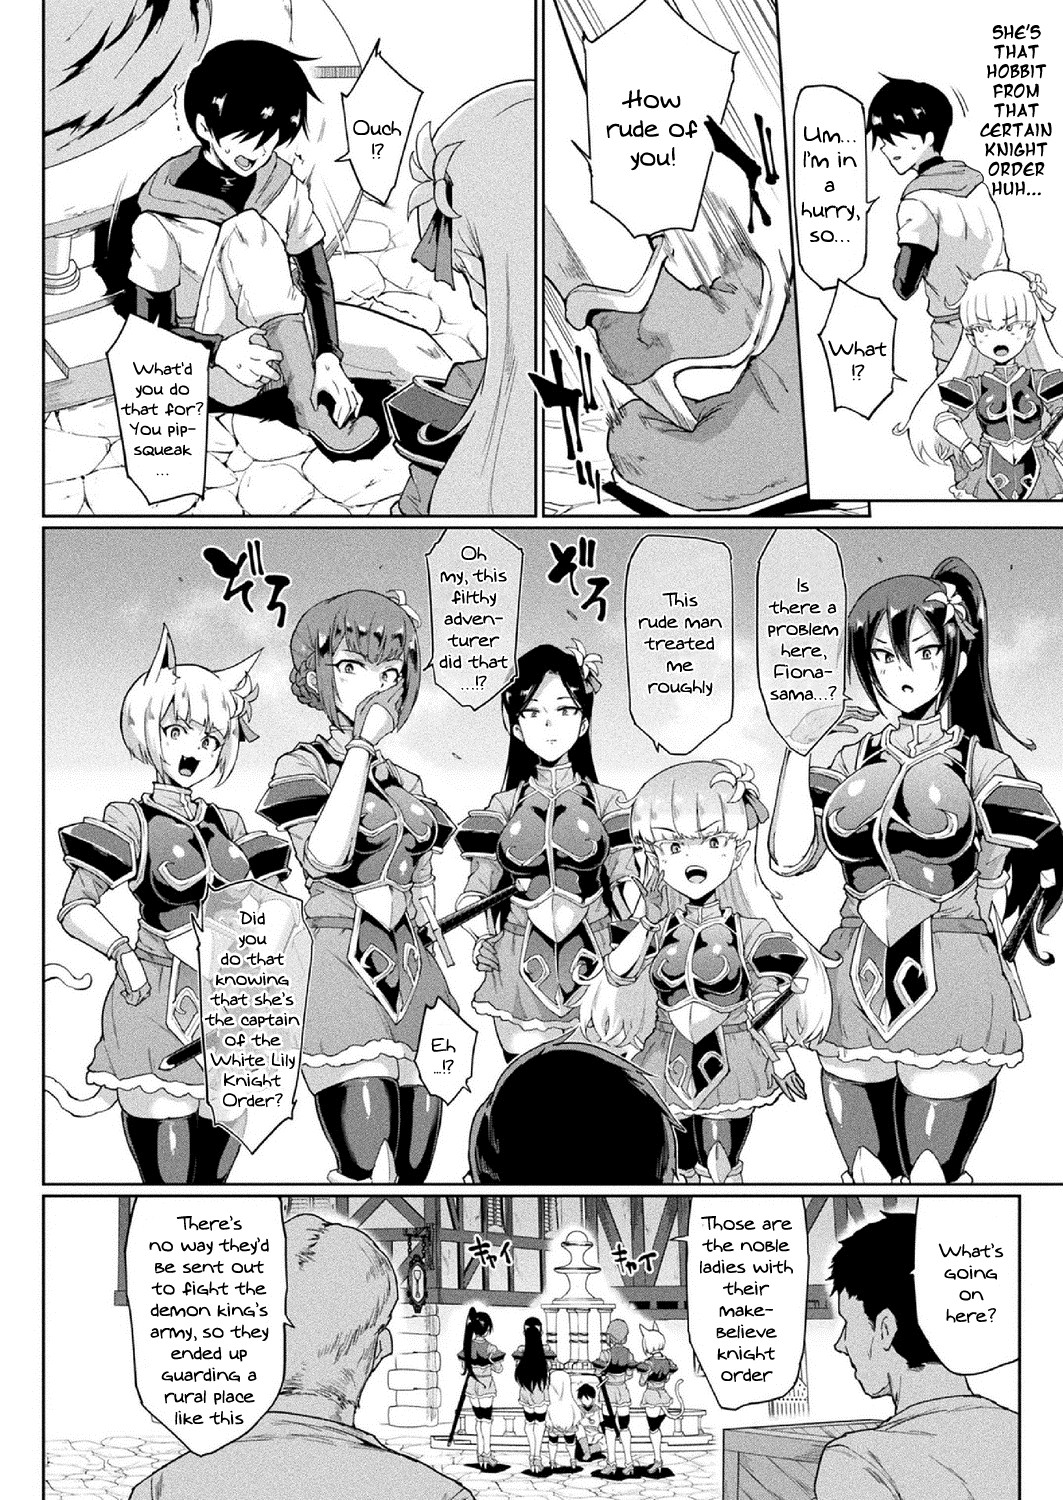 Time Stop Fantasia - Middle Part Hentai Magazine Chapters